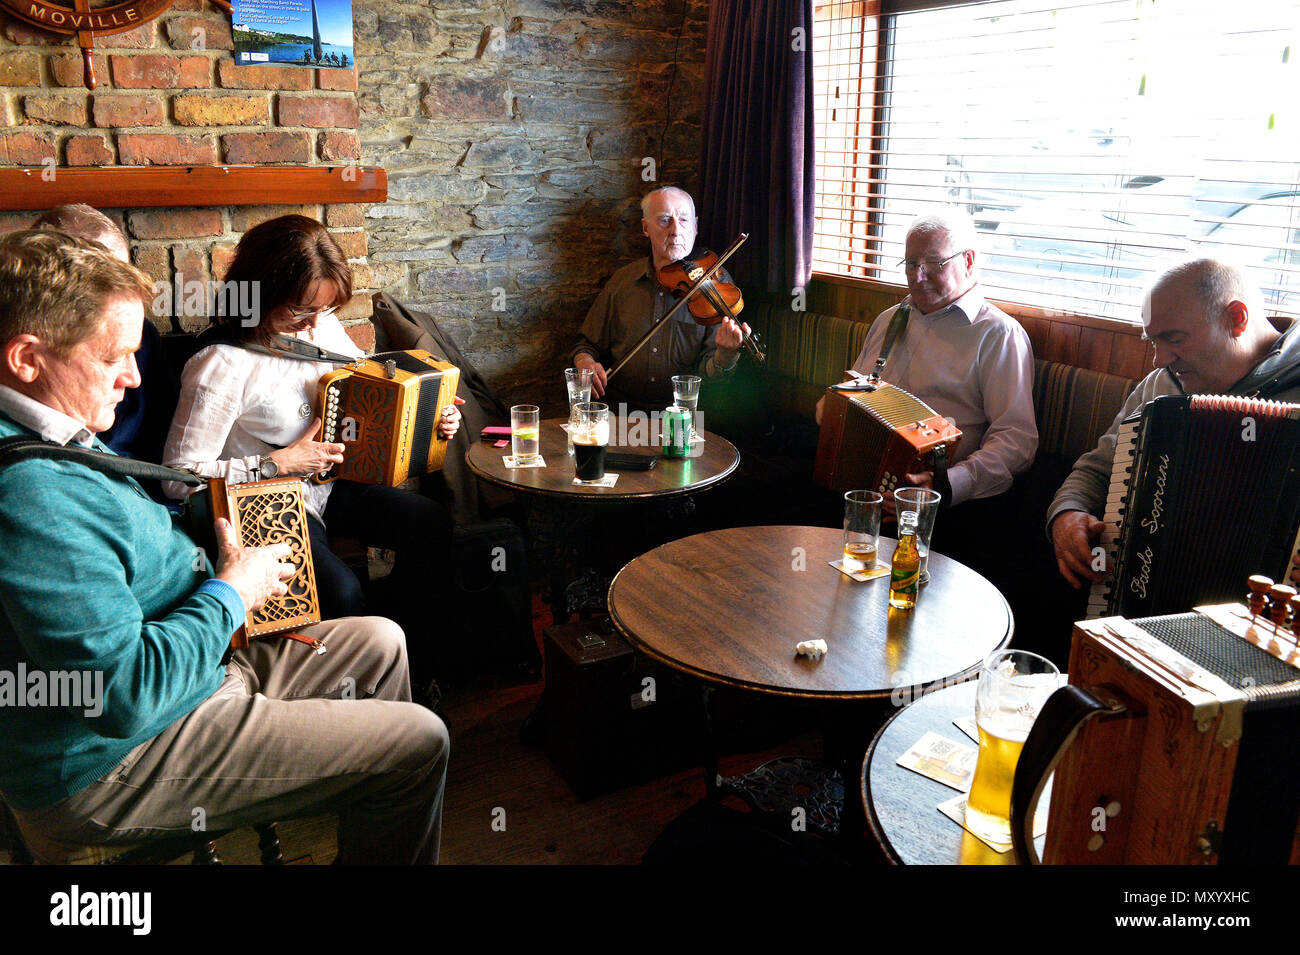 Musicians playing traditional Irish music in a pub in Moville, Inishiwen, County Donegal, Ireland. Stock Photo